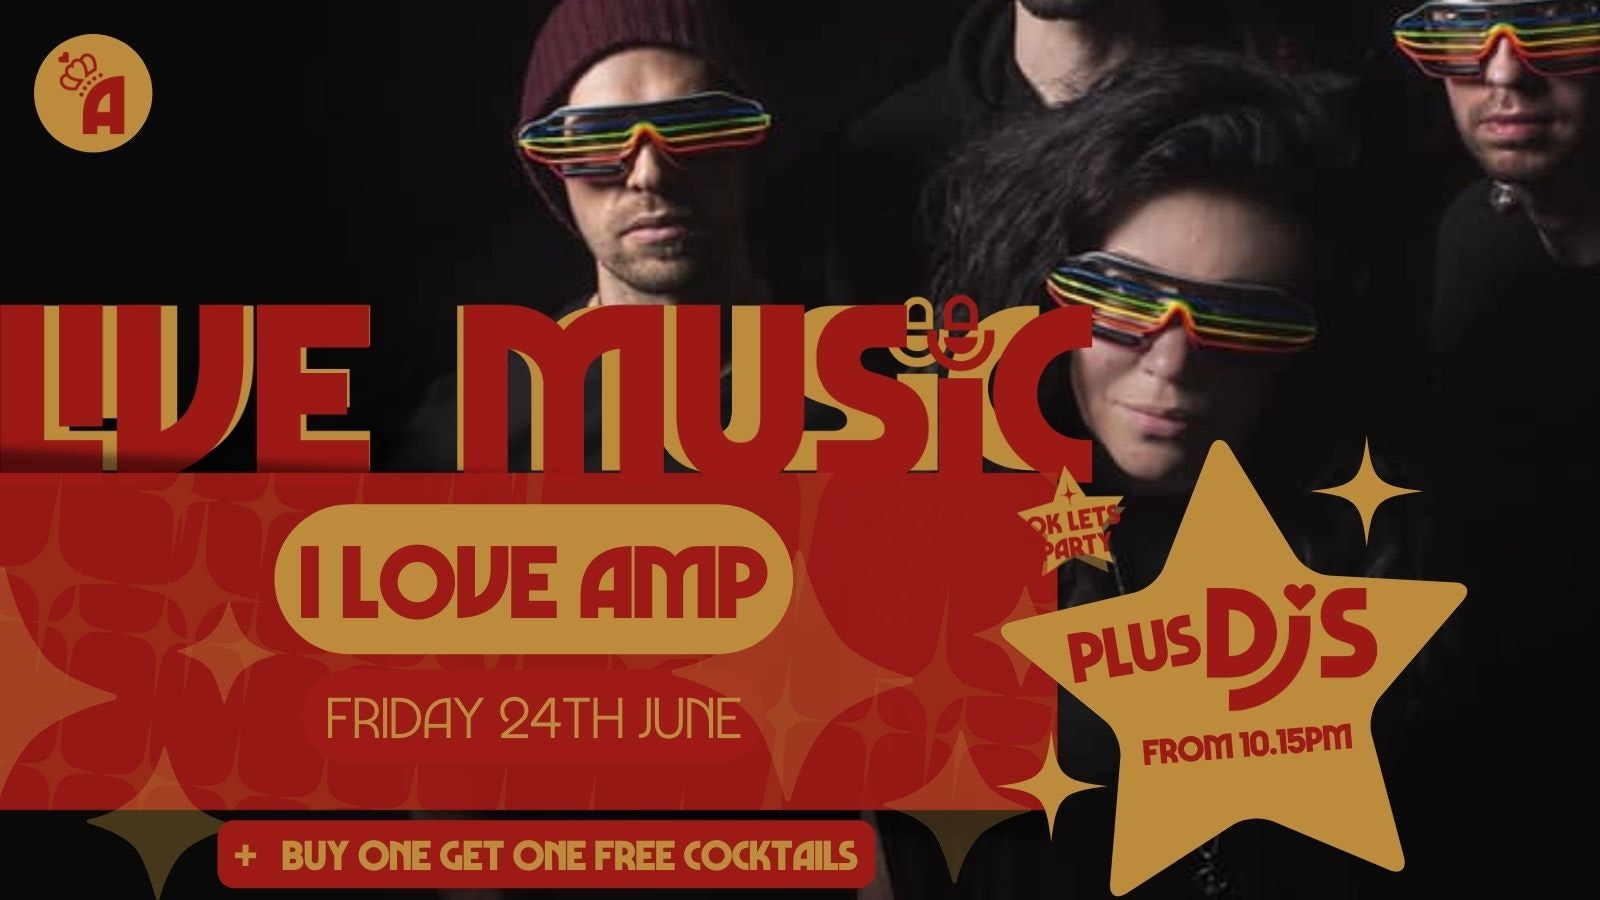 Live Music: I LOVE AMP // Annabel’s Cabaret & Discotheque, Plymouth